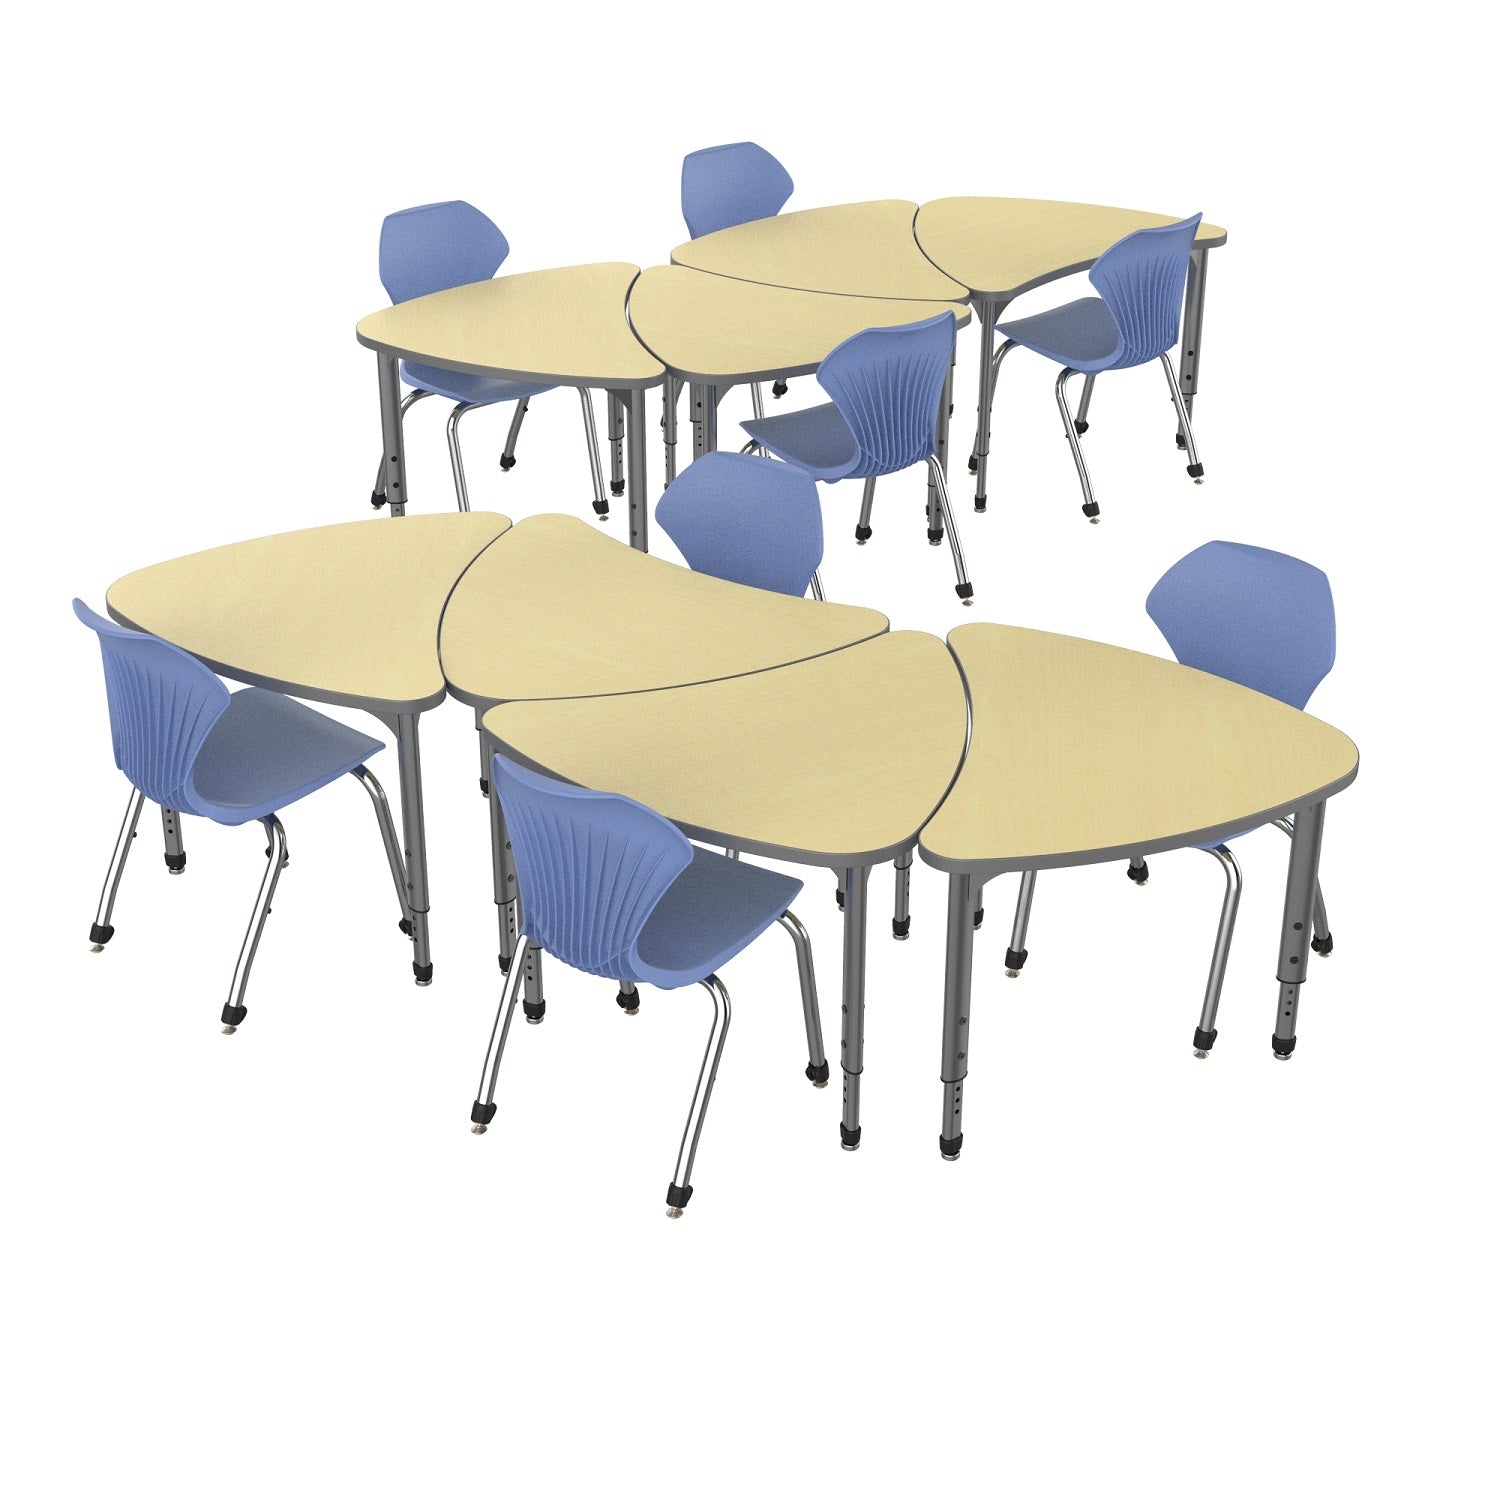 Apex Classroom Desk and Chair Package, 8 Large Chevron Collaborative Student Desks with 8 Apex Stack Chairs